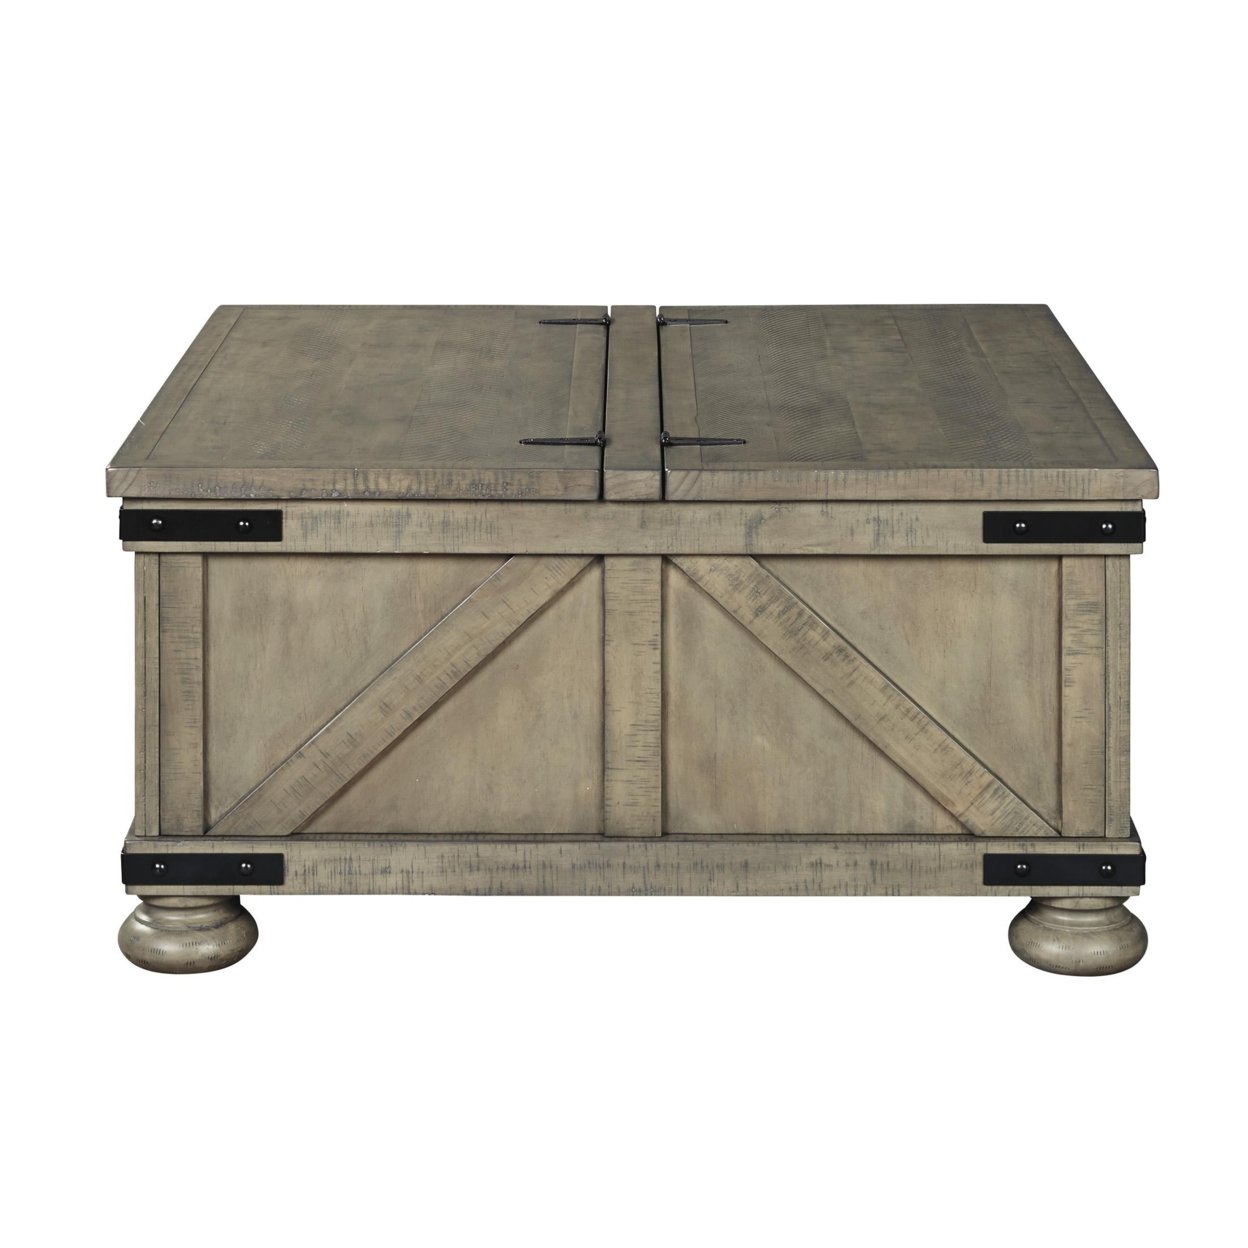 Farmhouse Cocktail Table With Lift Top Storage And Crossbuck Details, Gray- Saltoro Sherpi